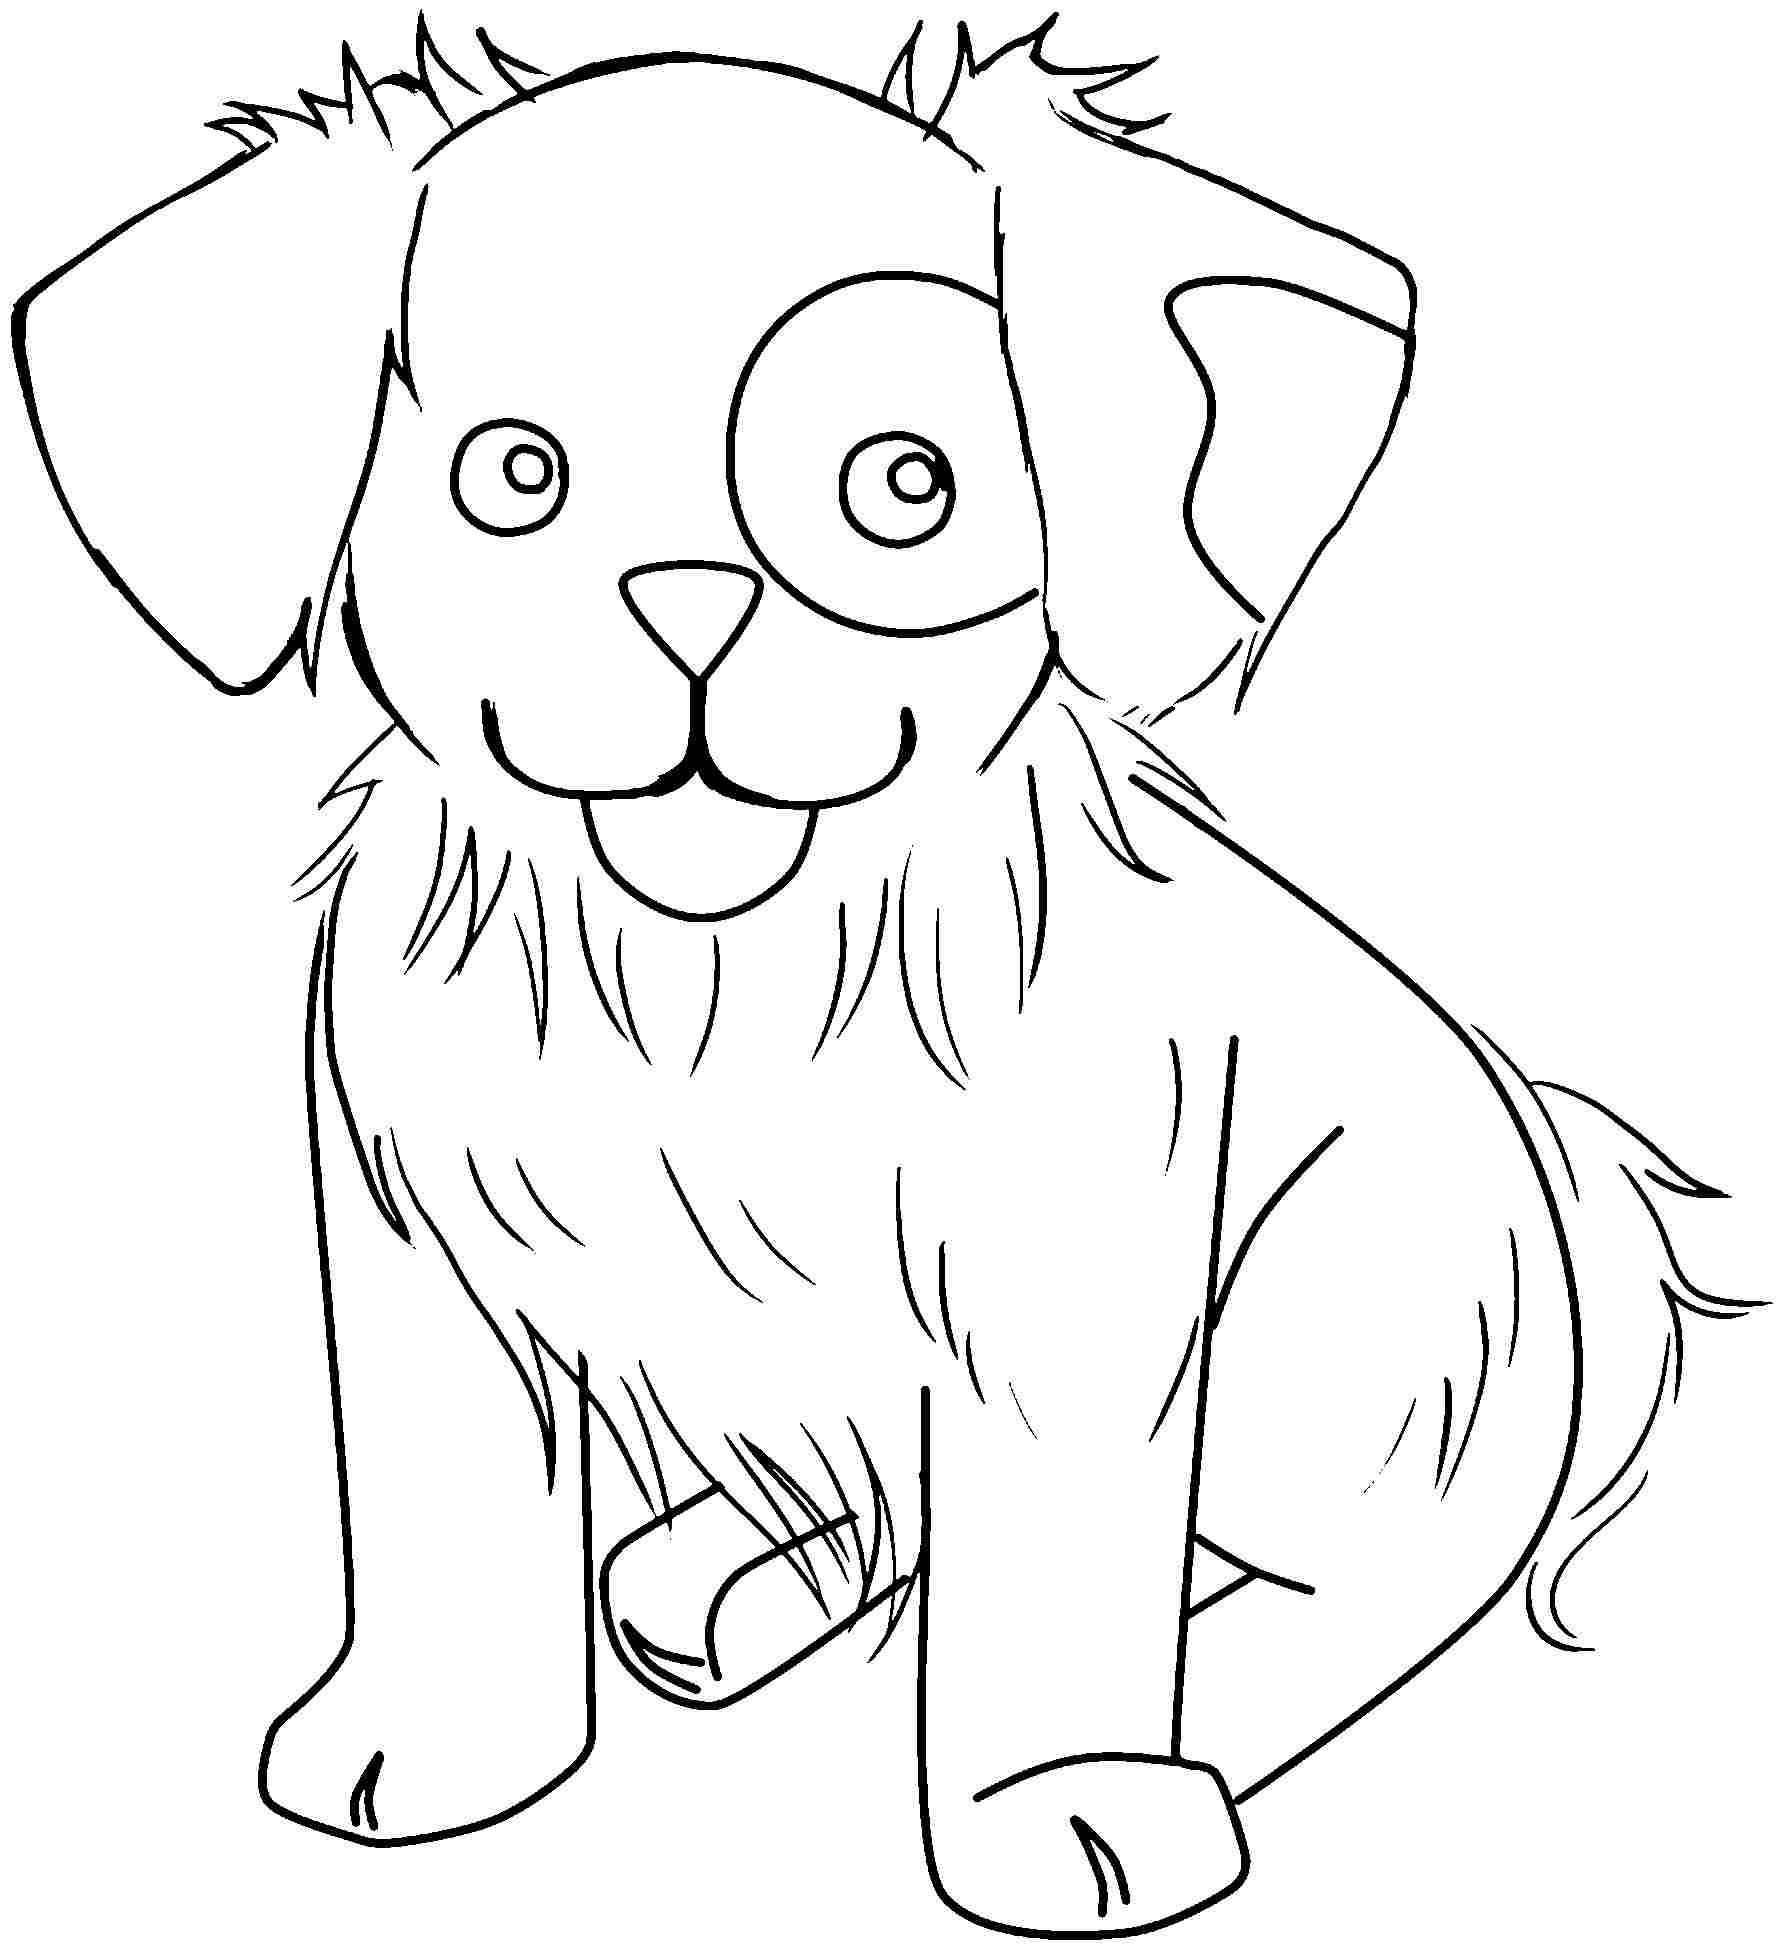 Cute Animal Coloring Pages   Best Coloring Pages For Kids